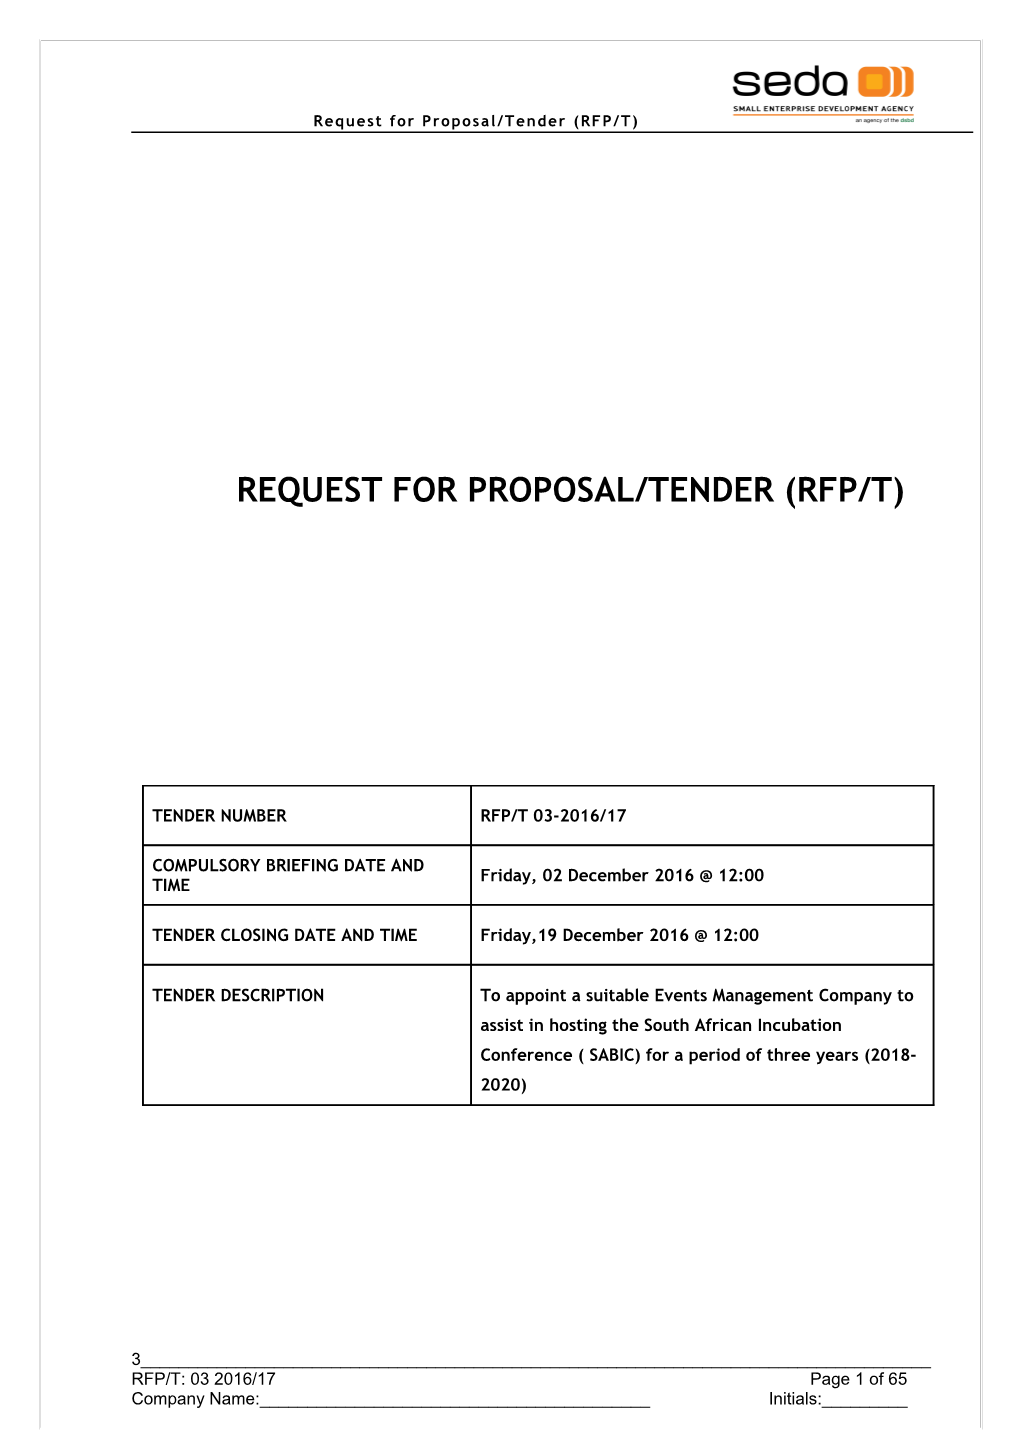 Request for Proposal/Tender (Rfp/T)